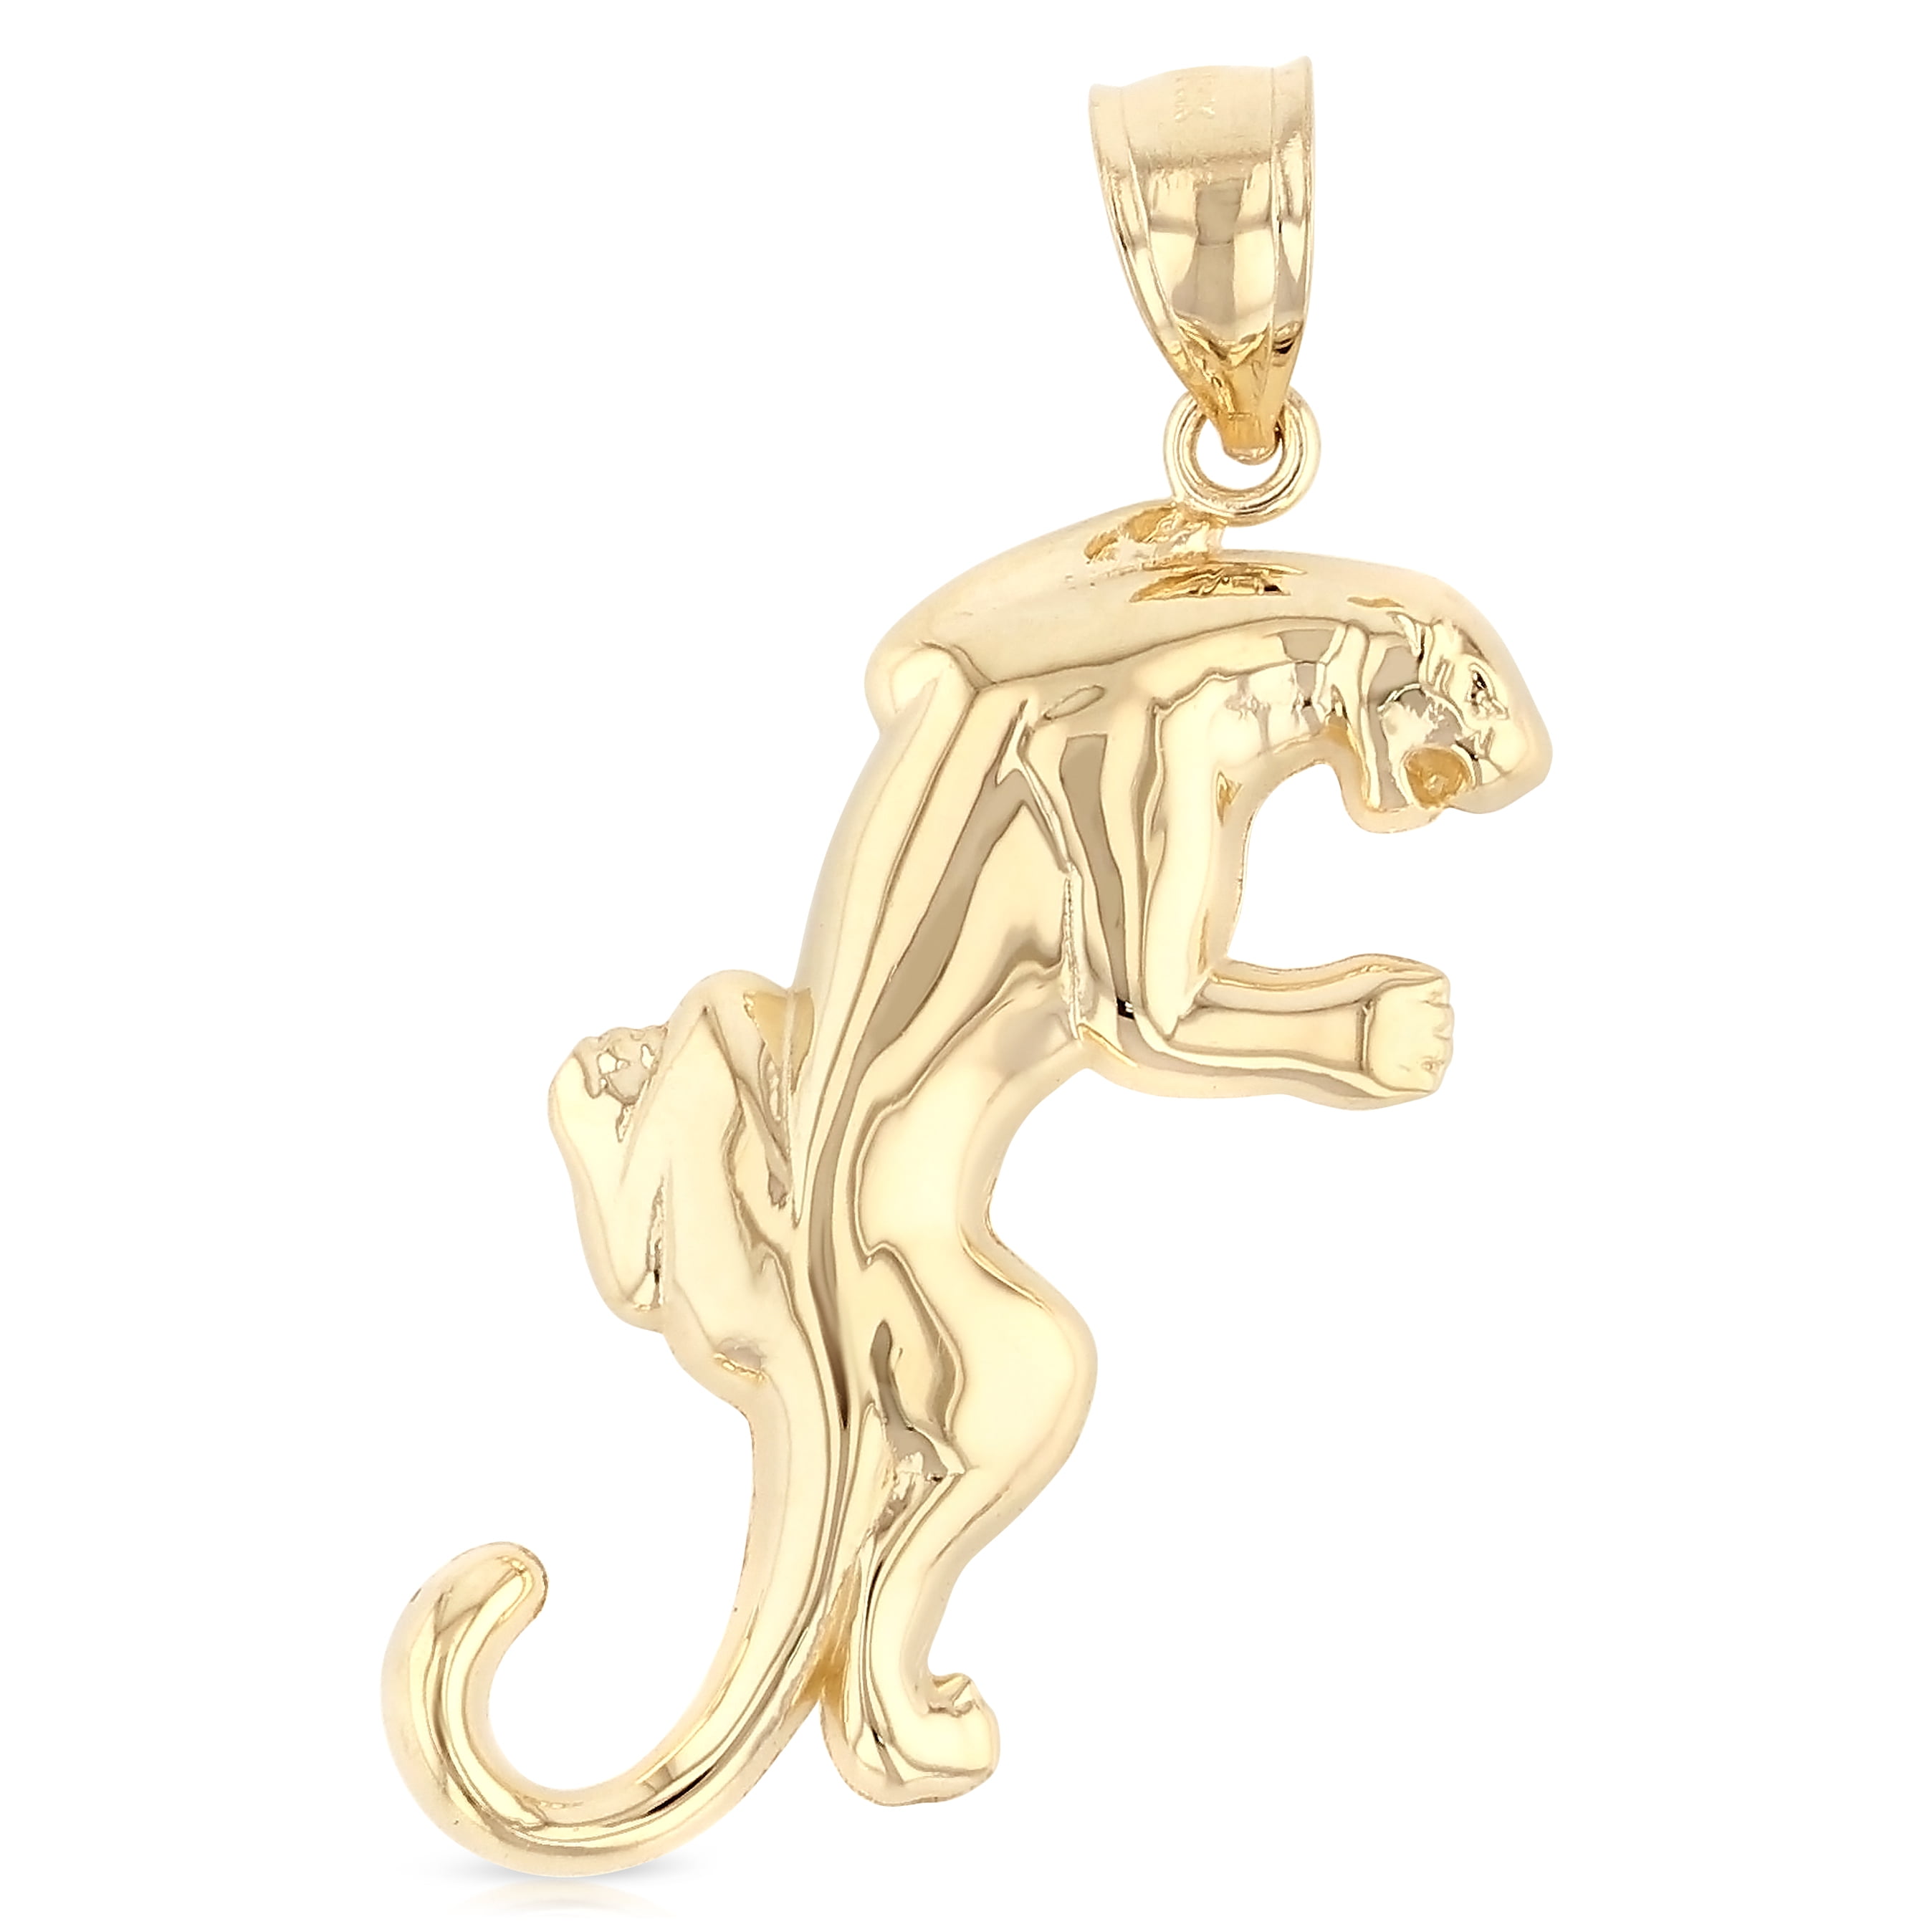 Details about   14K Yellow Gold High Heels Charm Pendant